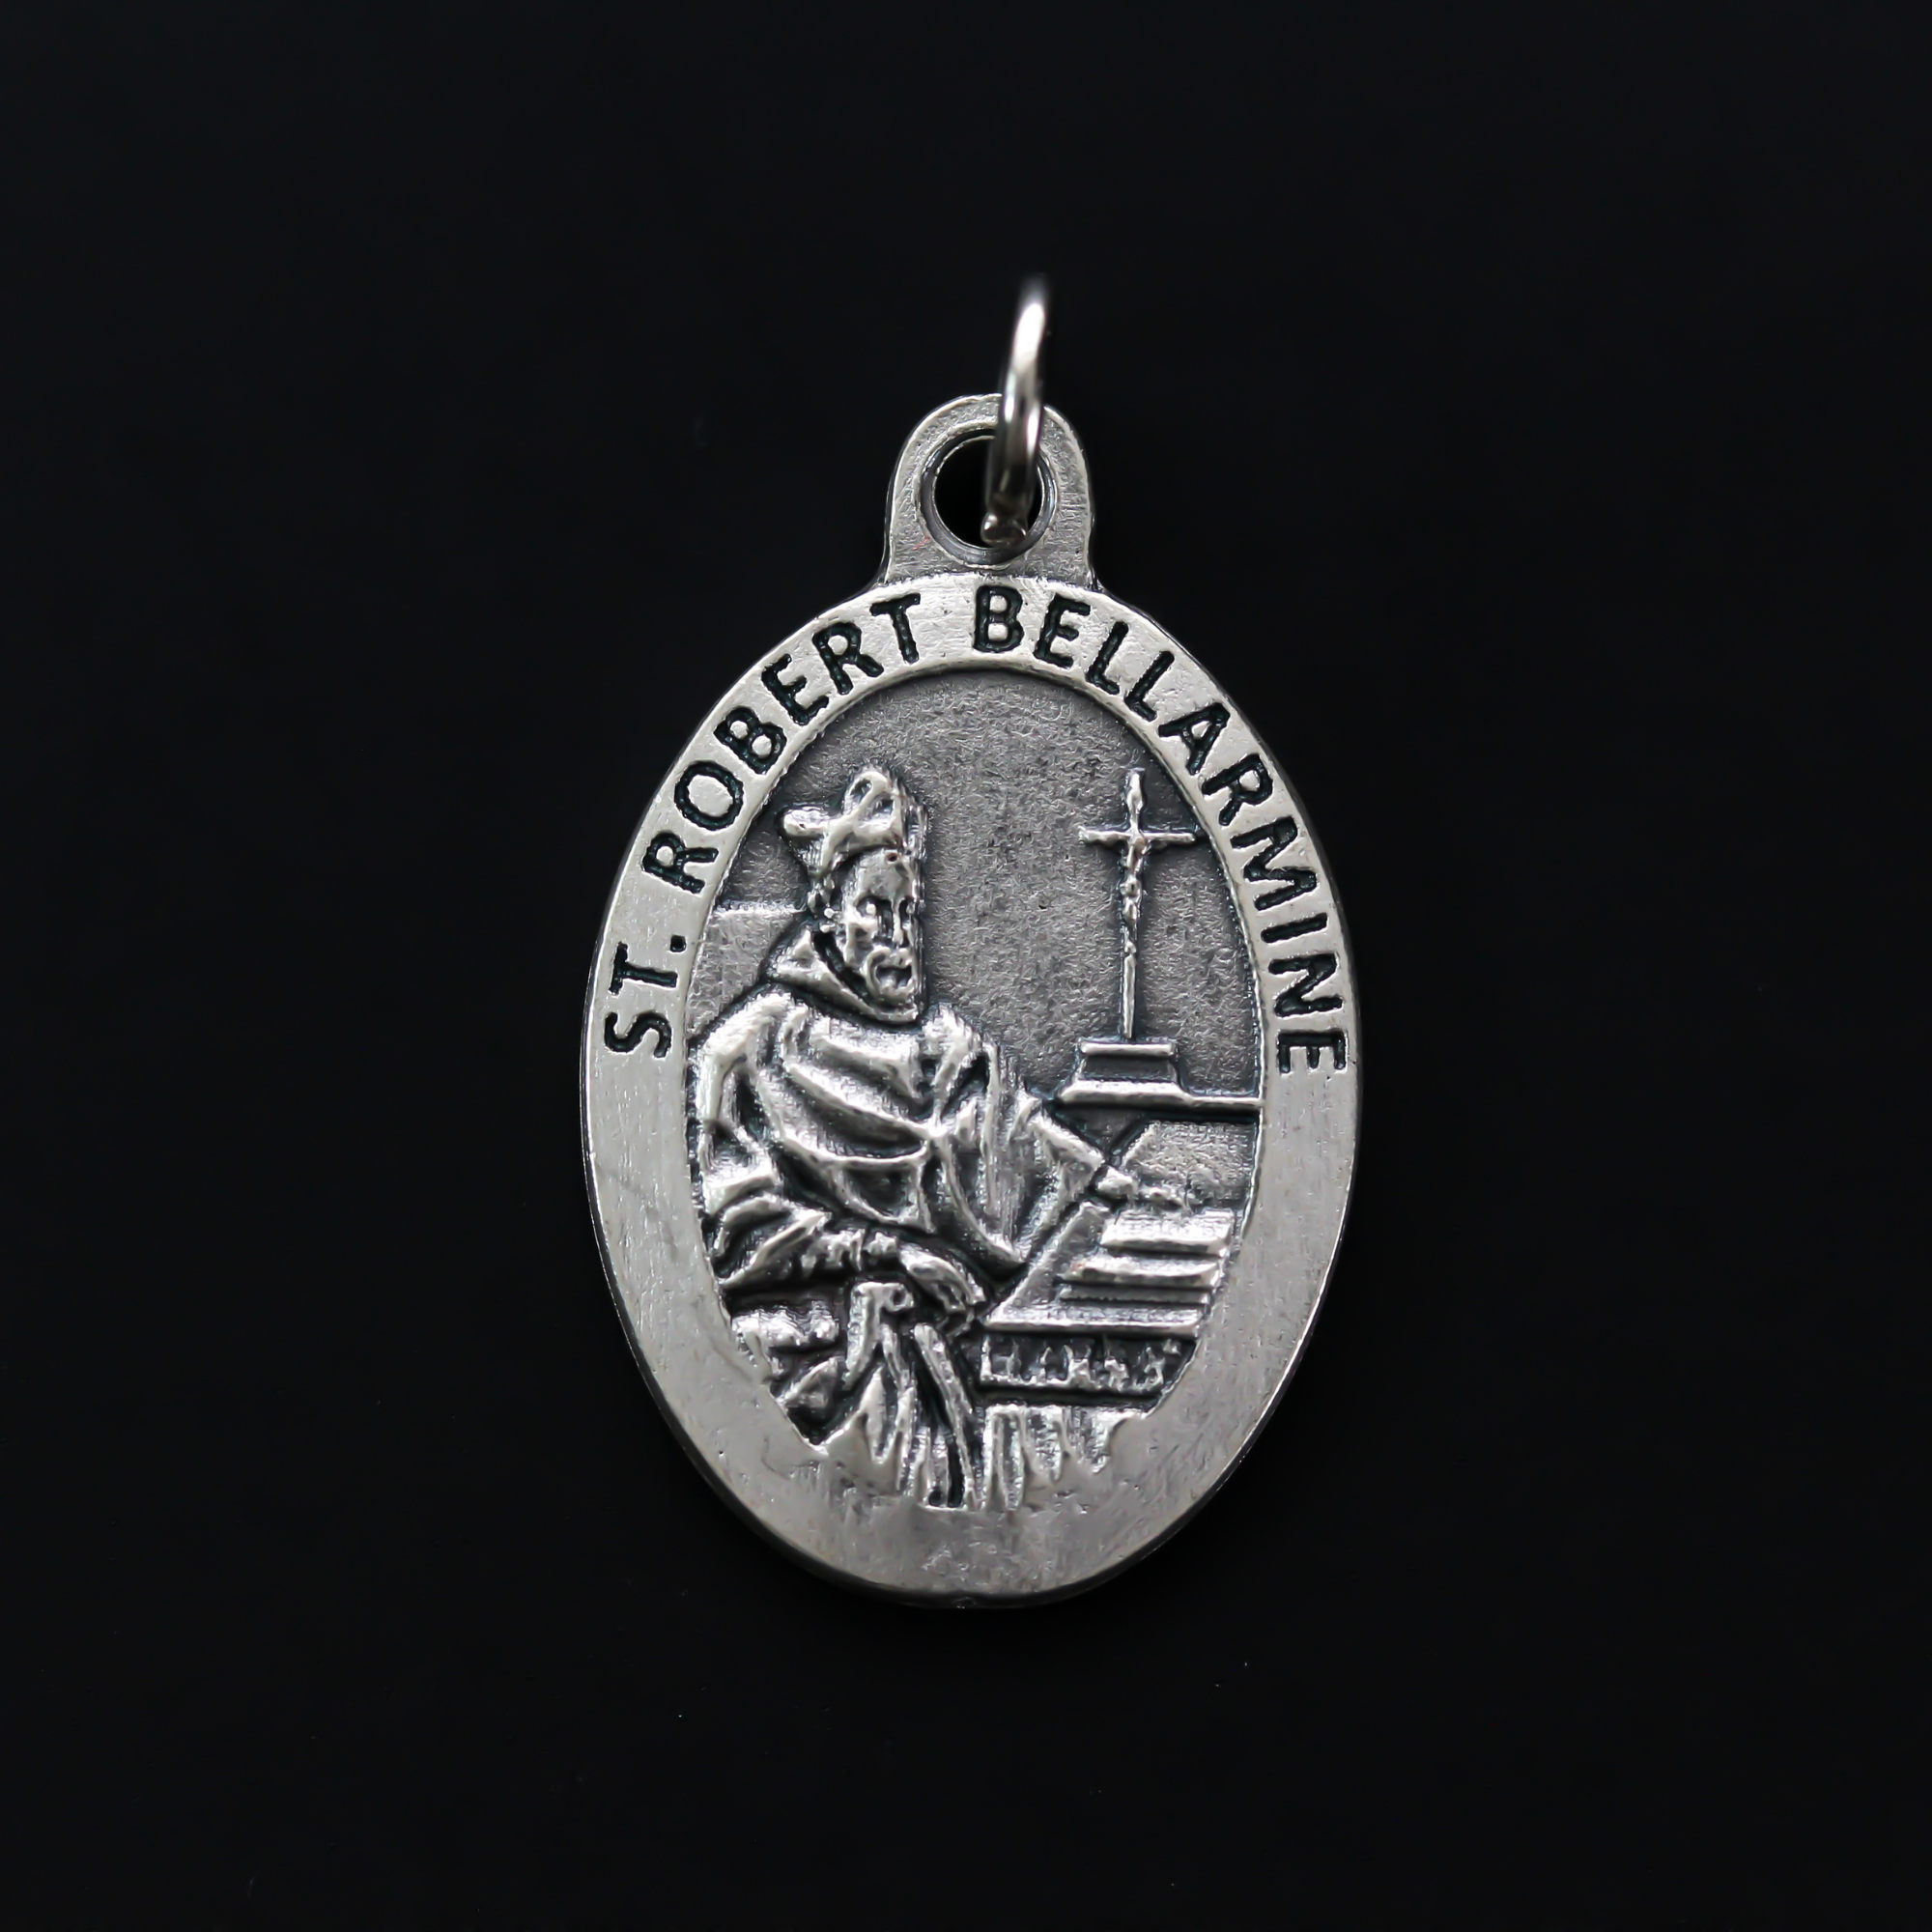 Saint Robert Bellarmine medal that depicts the saint on the front and is marked "Pray For Us" on the back.